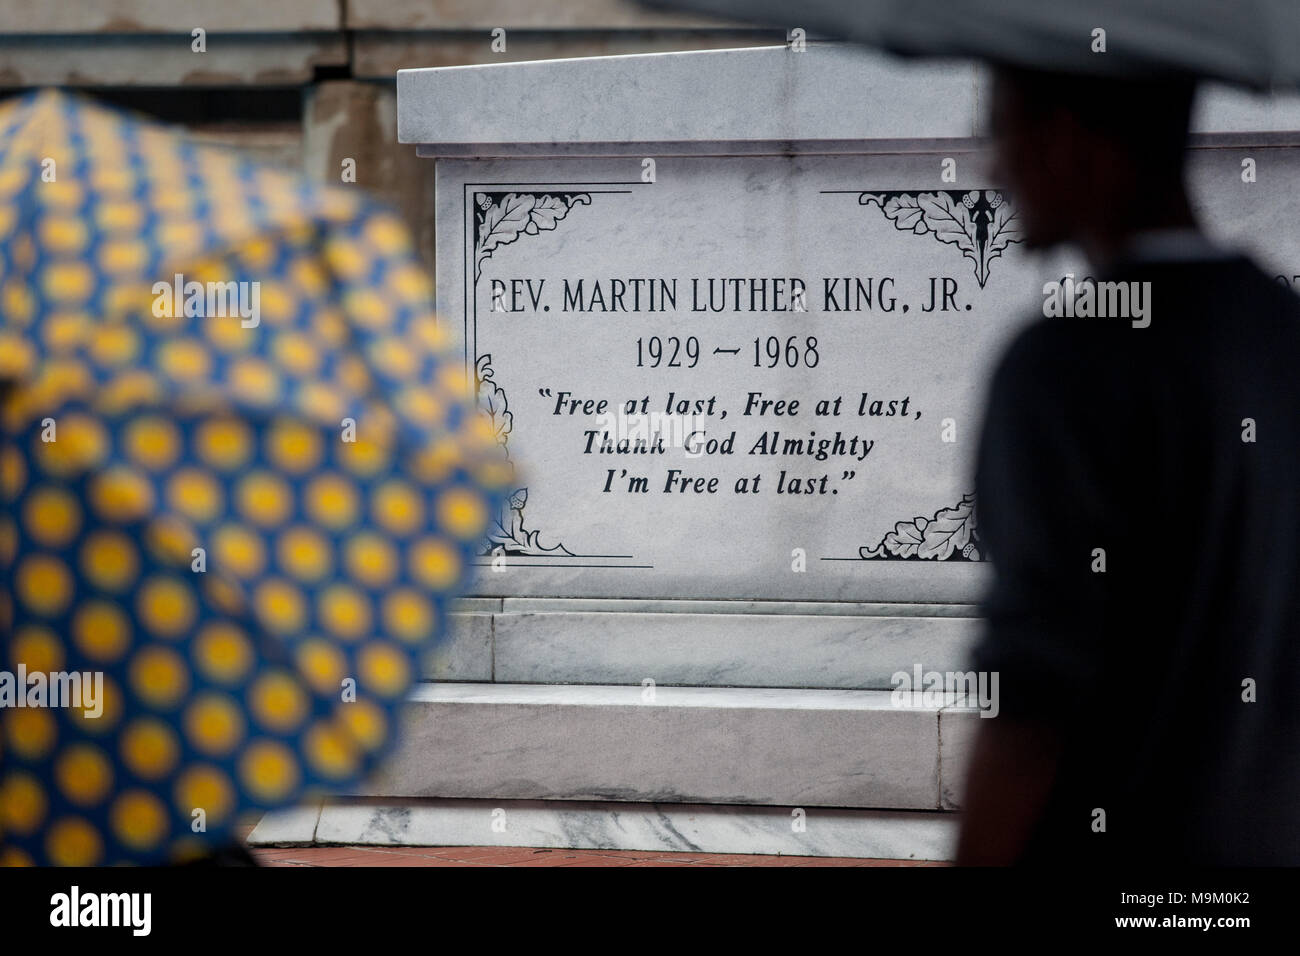 Civil Rights leader Dr Martin Luther King Jr Tomb located at the Martin Luther King Historic Site in Atlanta, Georgia. Stock Photo